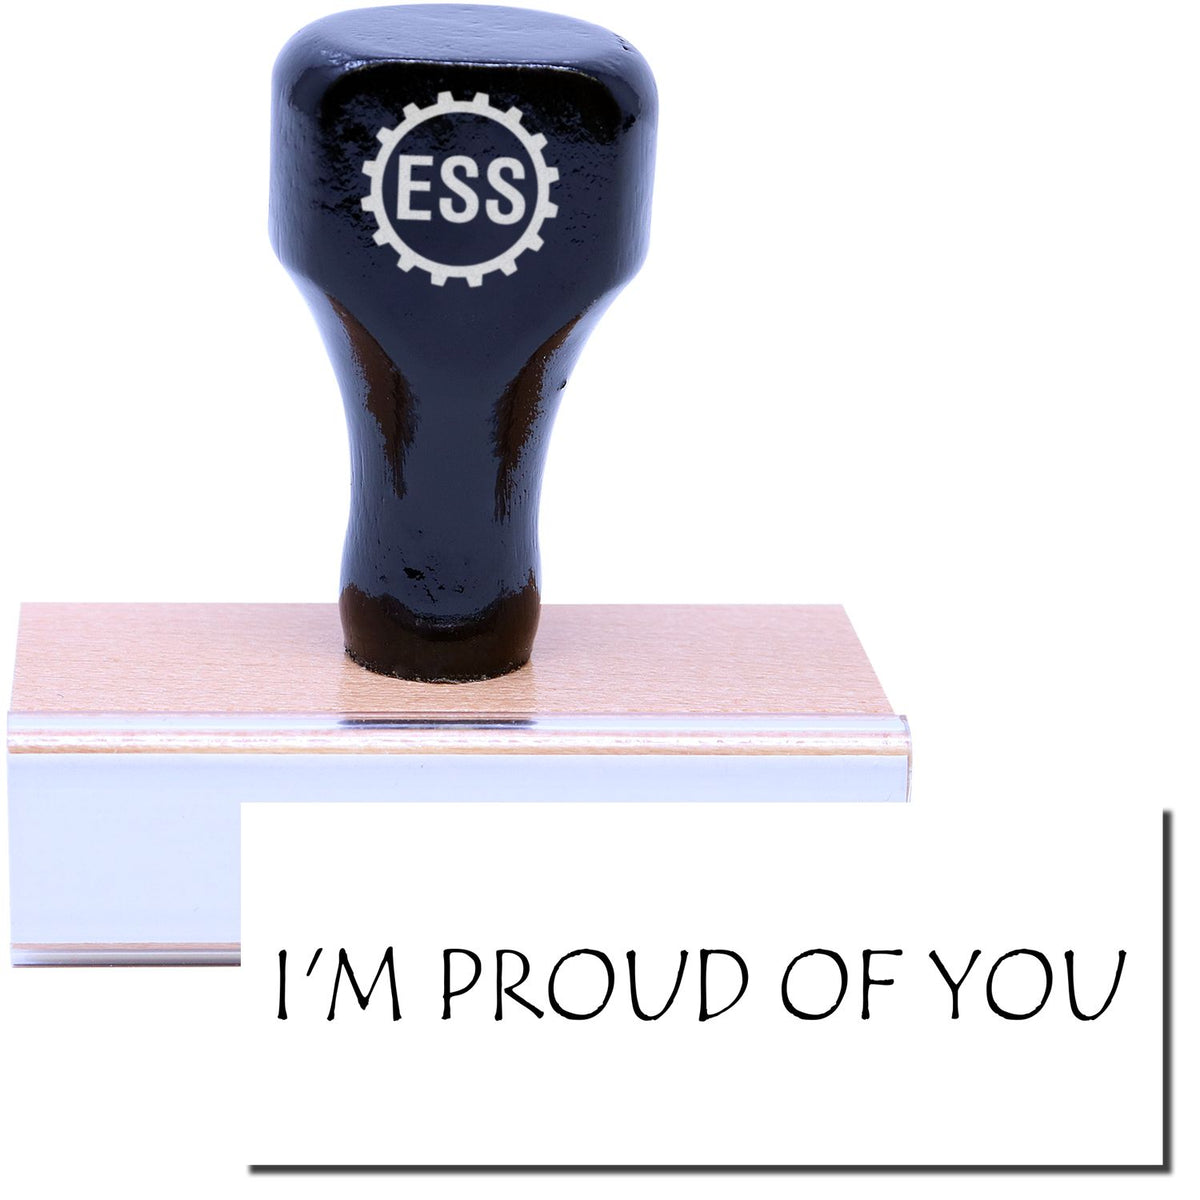 A stock office rubber stamp with a stamped image showing how the text &quot;I&#39;M PROUD OF YOU&quot; is displayed after stamping.